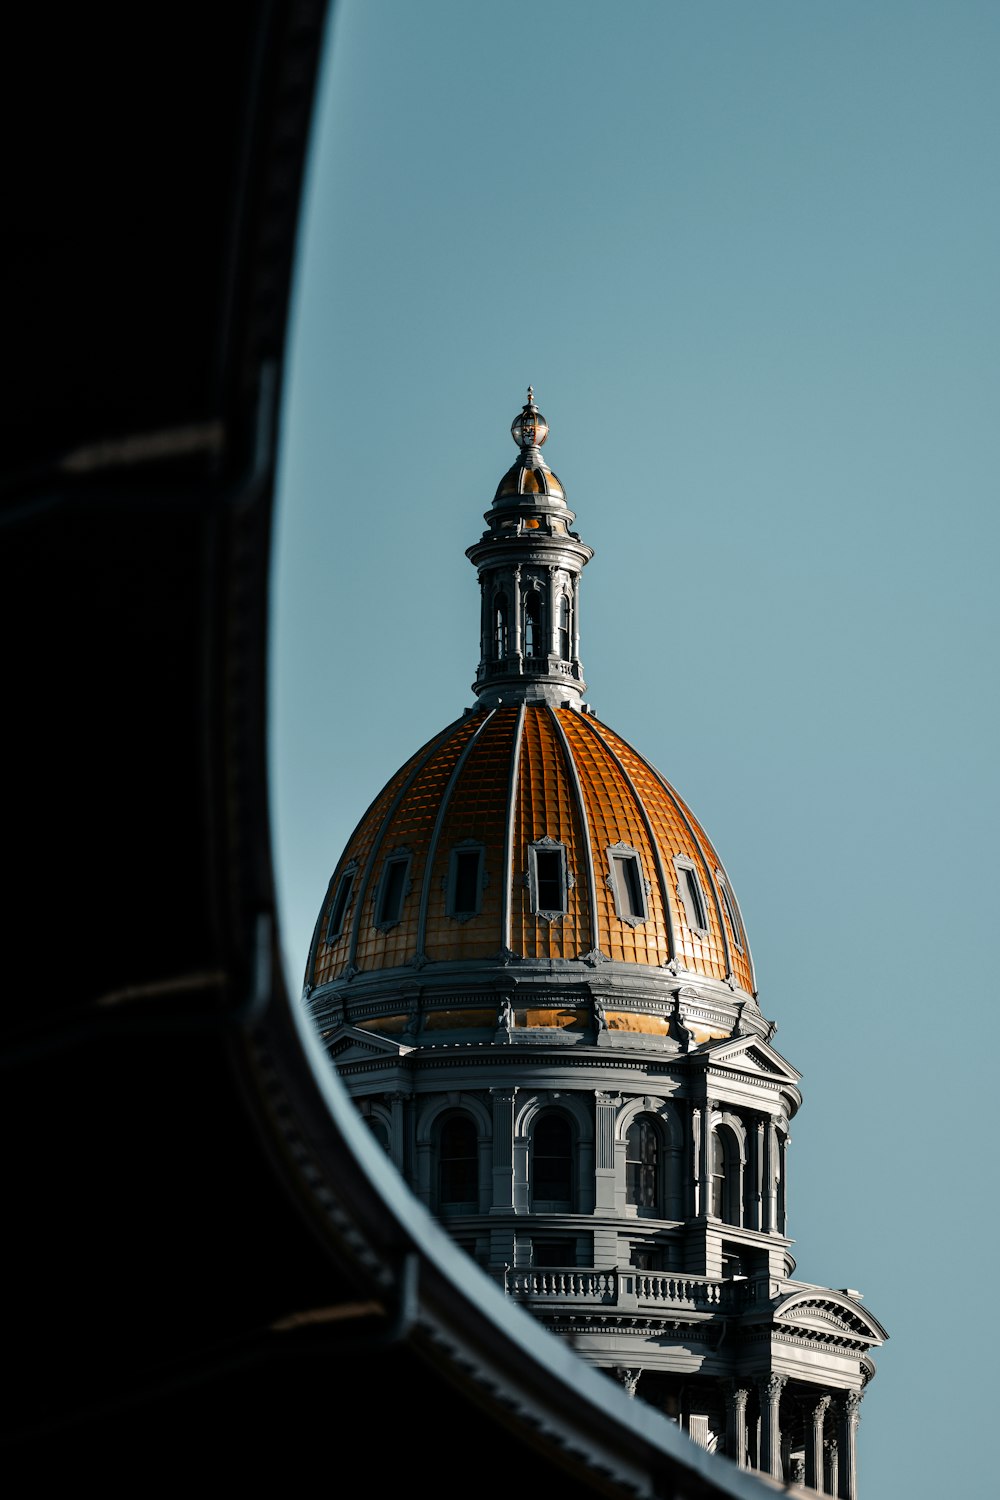 the dome of a building with a clock on it